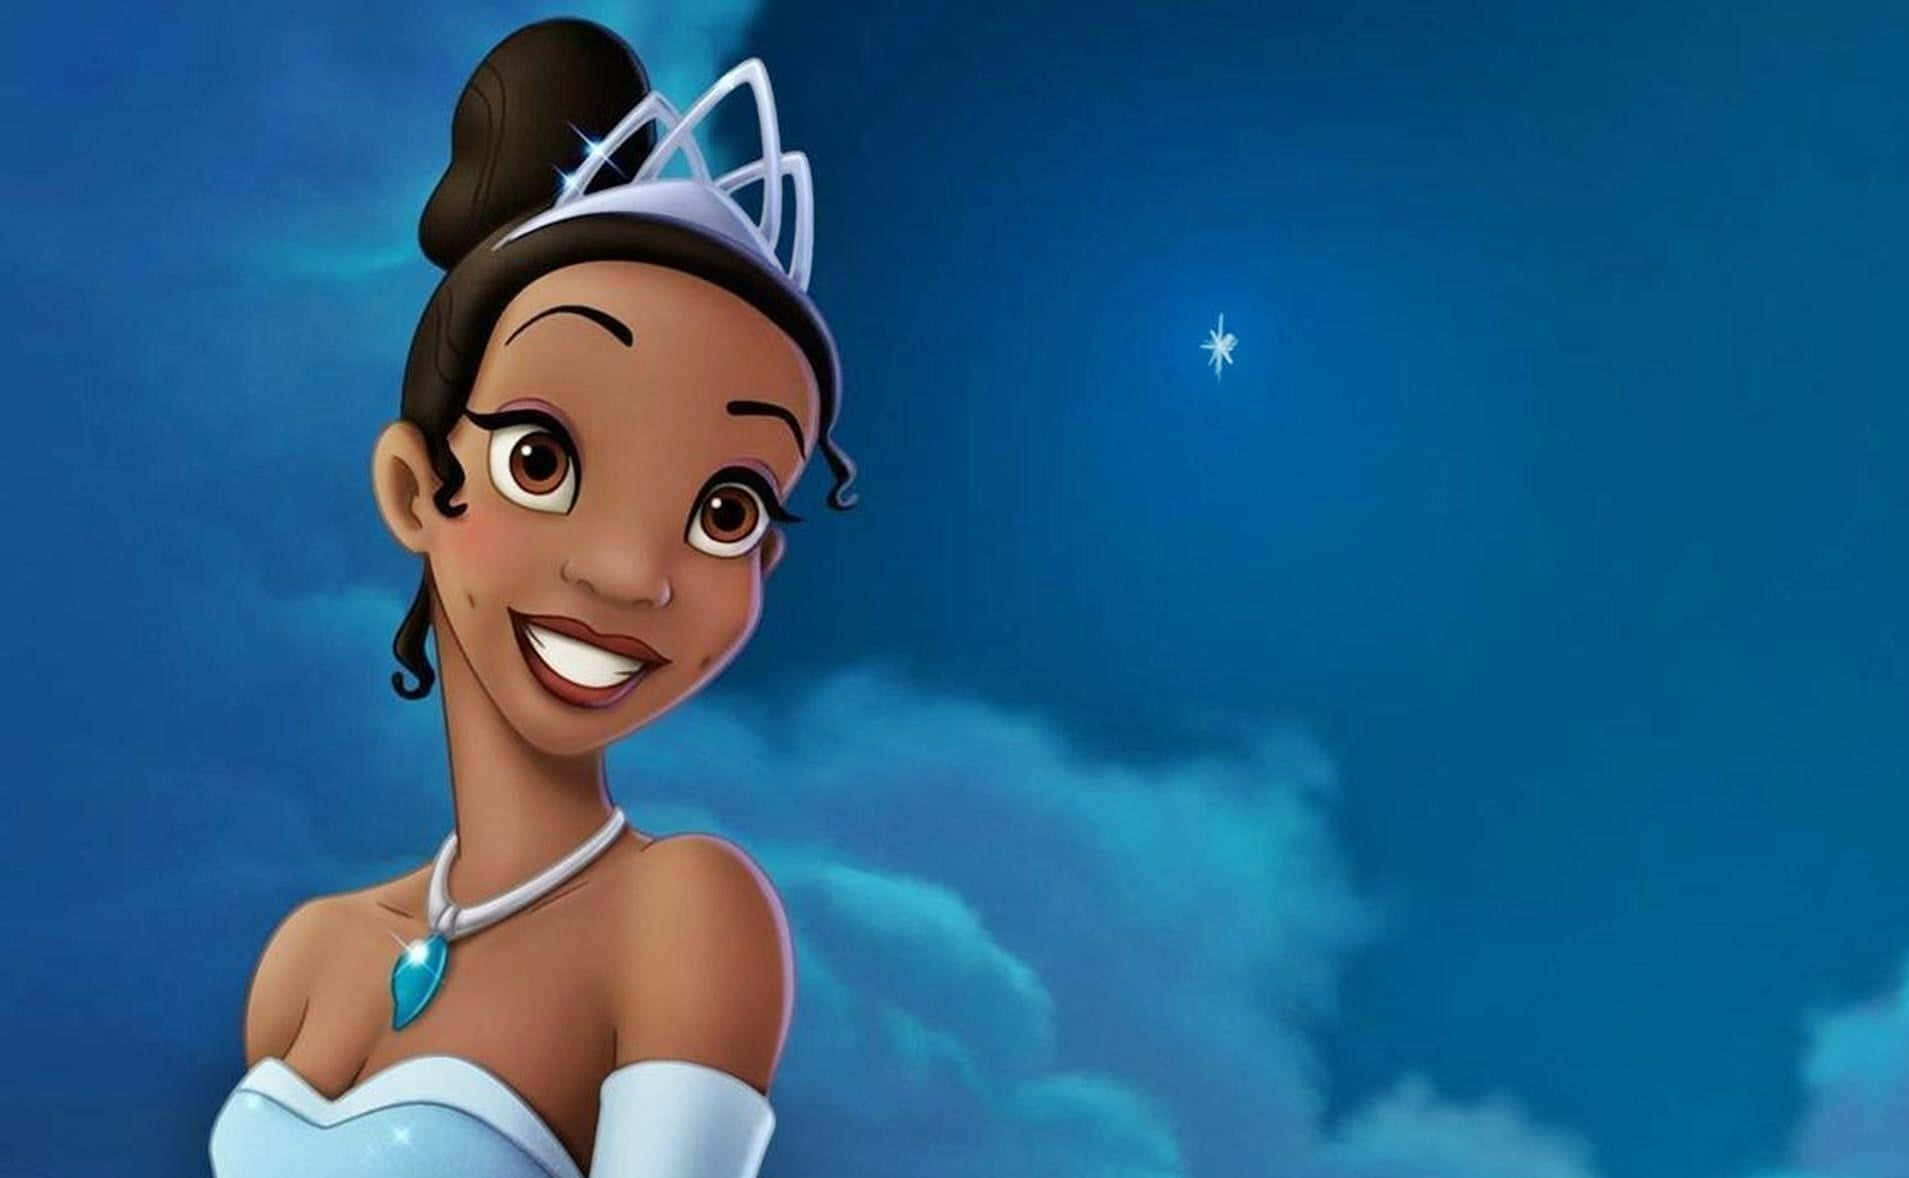 Princess Tiana looking beautiful and ready to take on the world Wallpaper